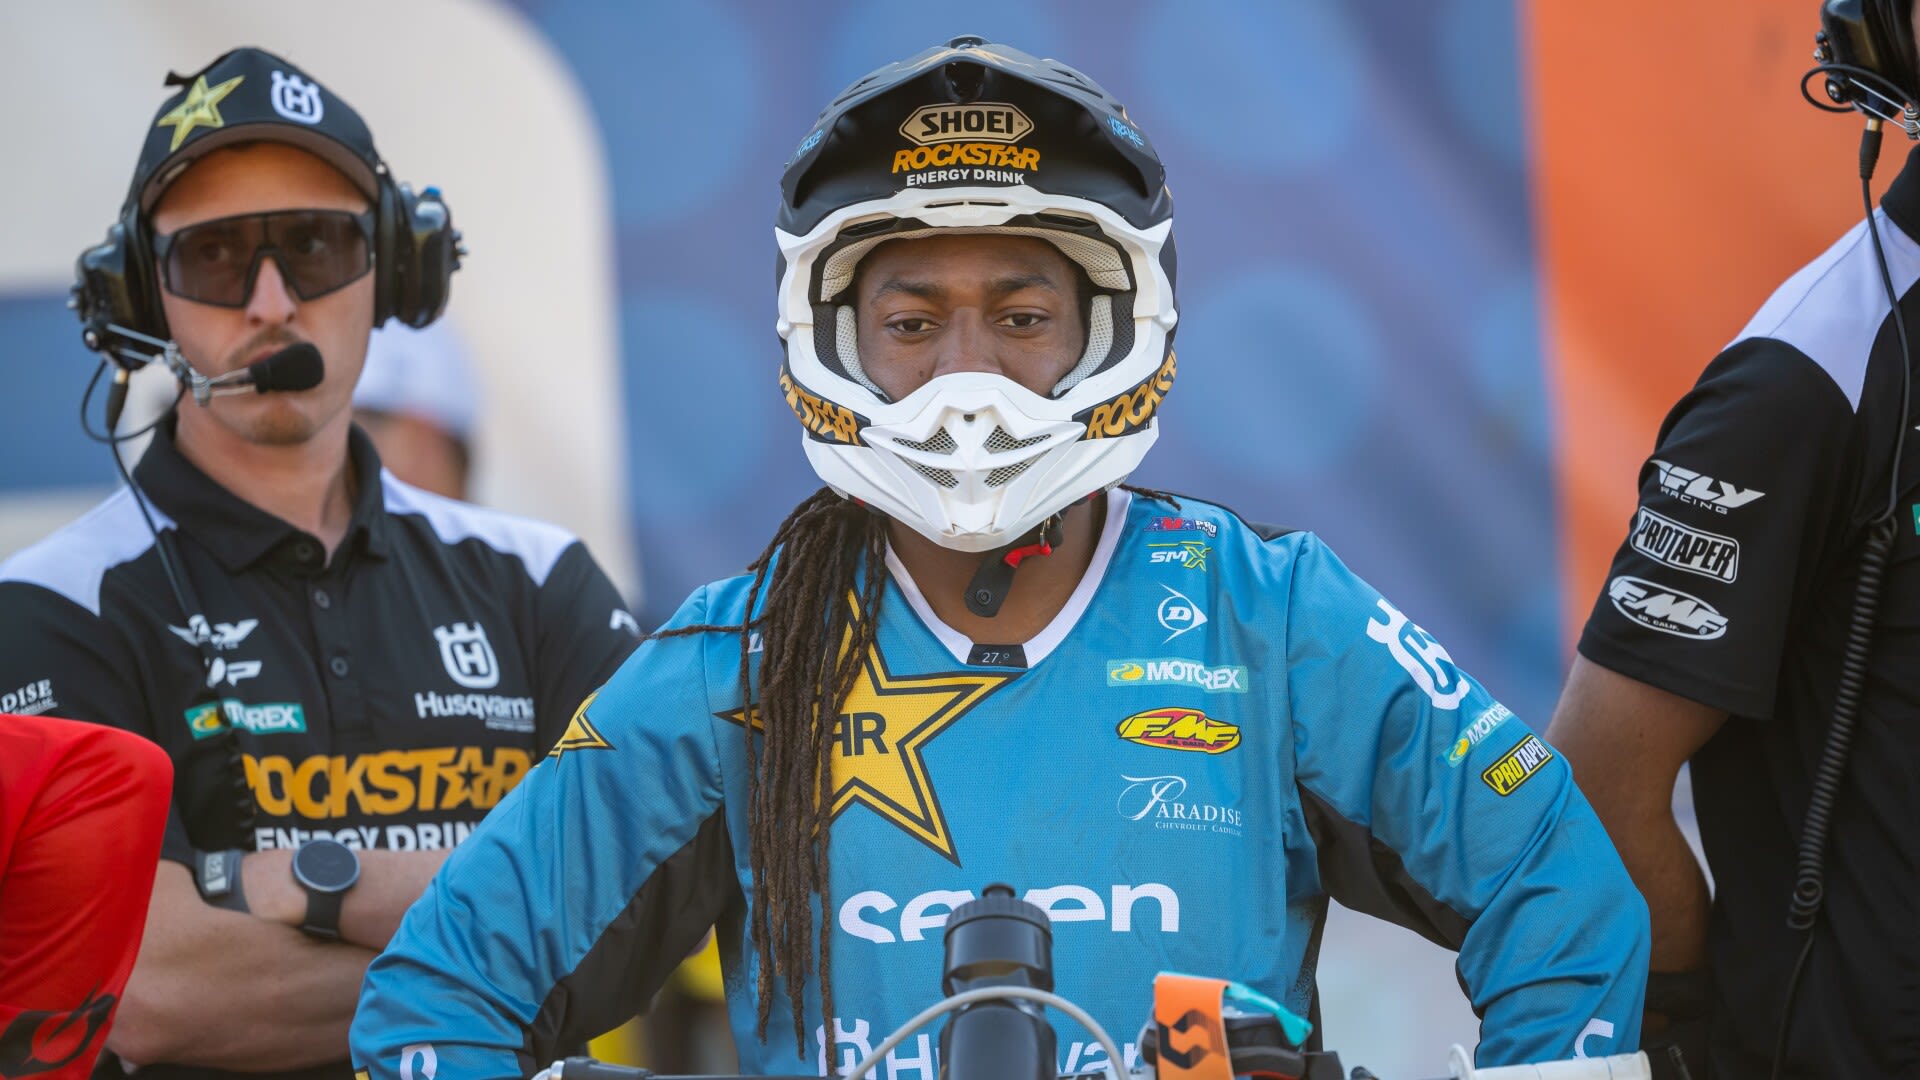 Malcolm Stewart climbs upward in Pro Motocross and is enjoying every minute of the day